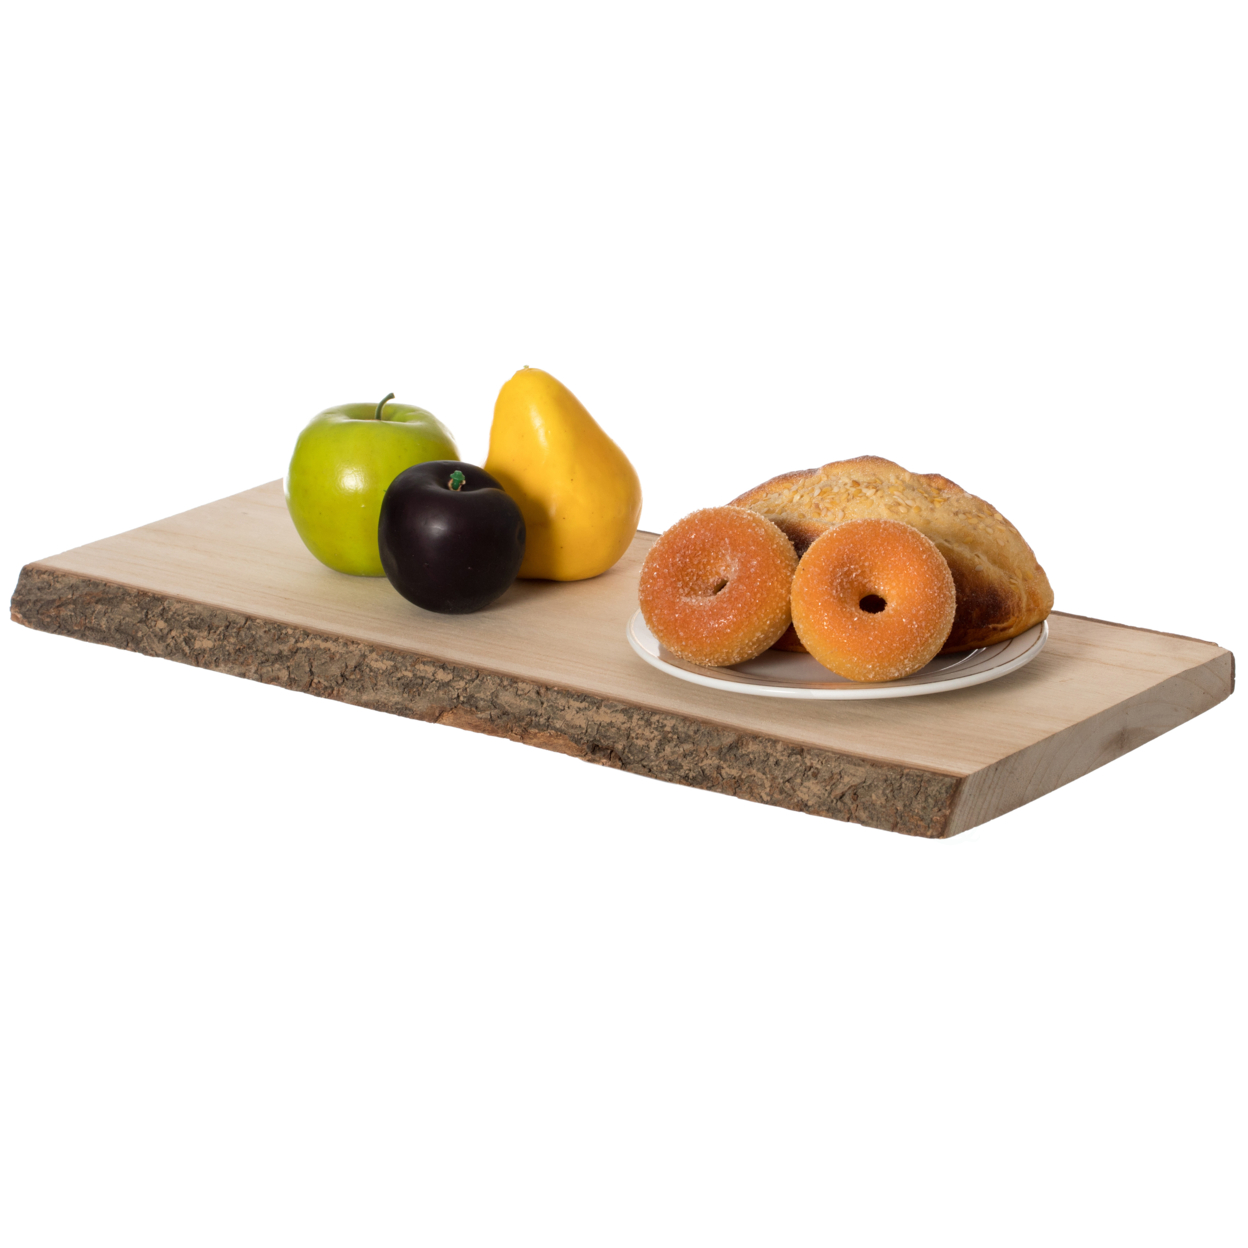 Rustic Natural Tree Log Wooden Rectangular Shape Serving Tray Cutting Board - 20